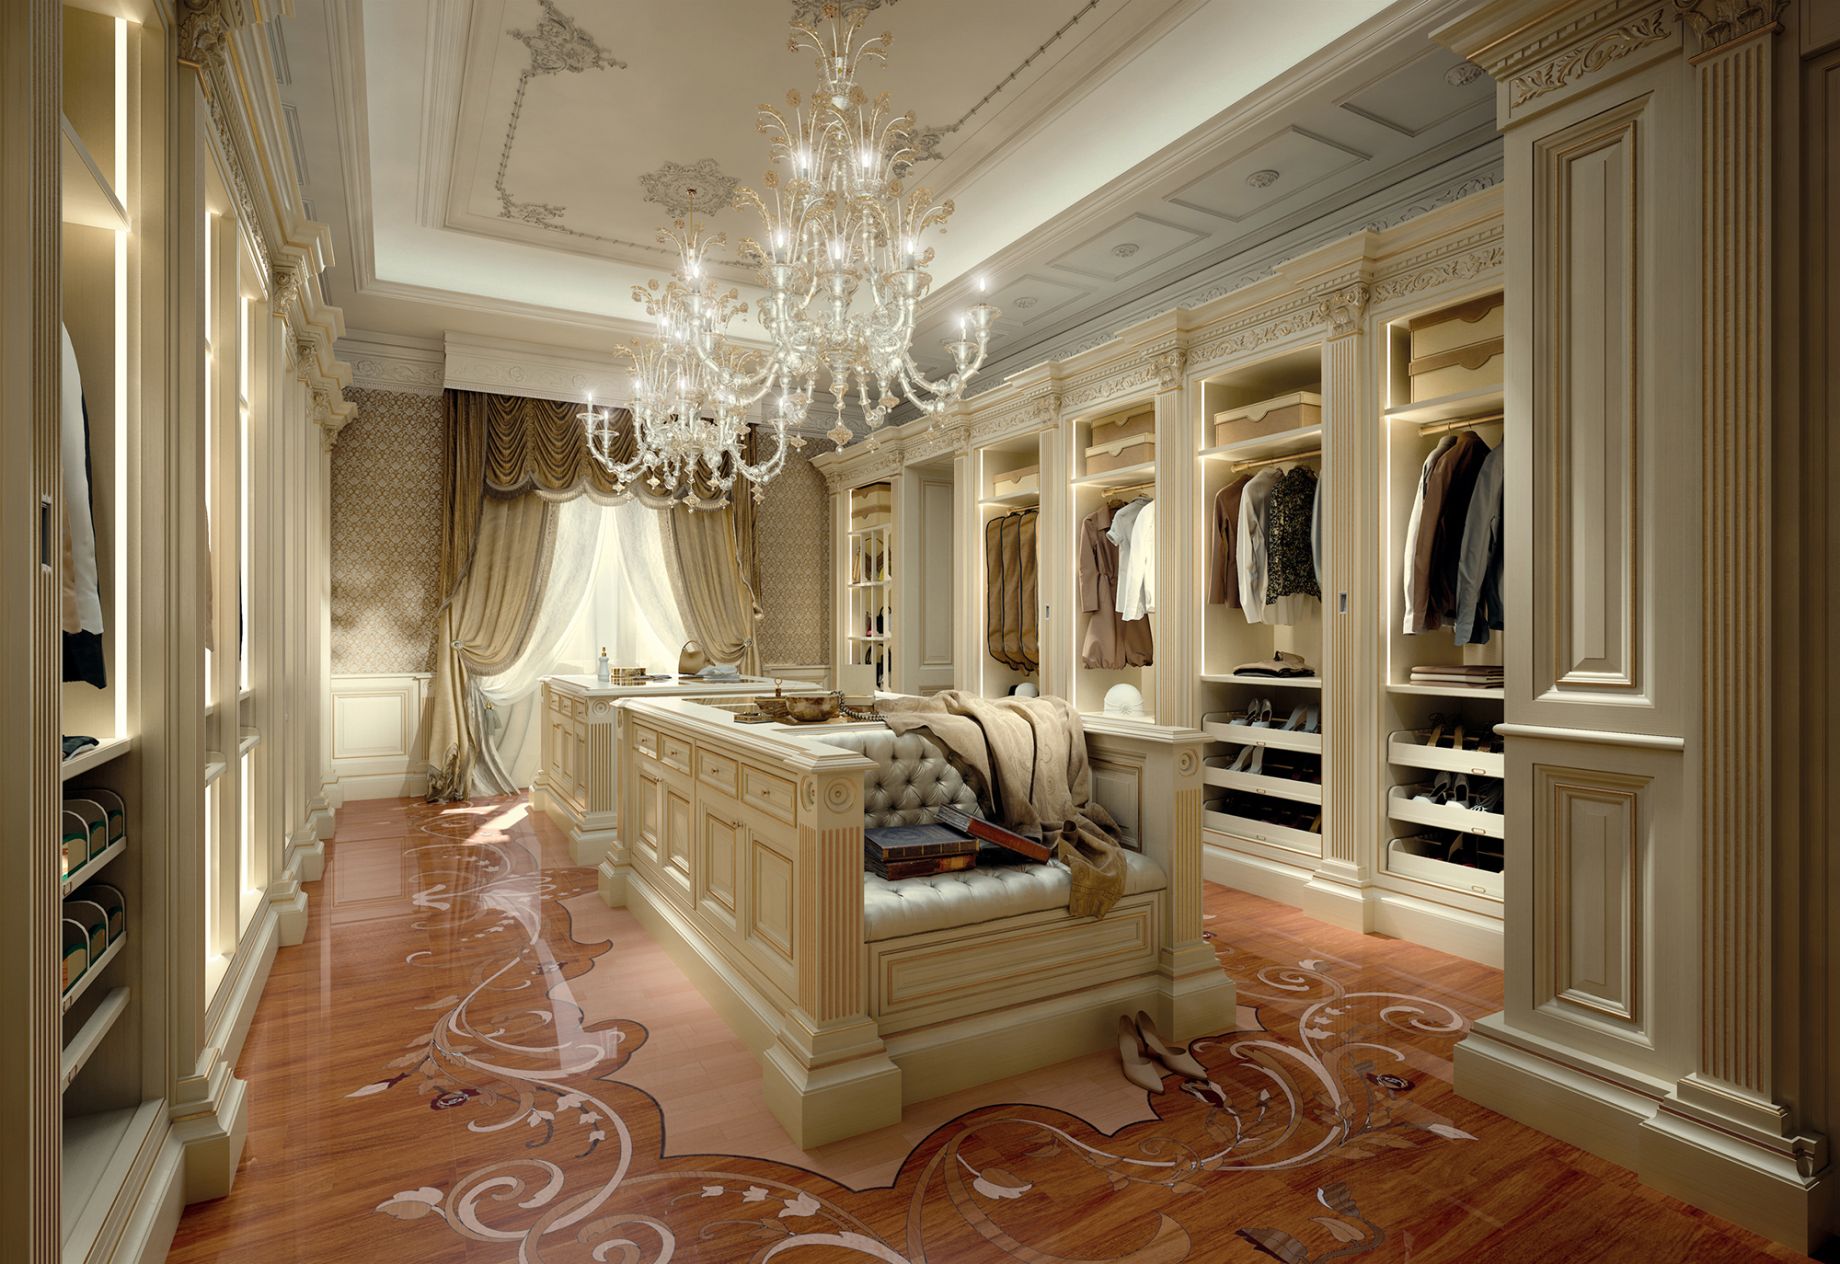 Neoclassical Italian wardrobe with a central sofa and gold lacquered finishes